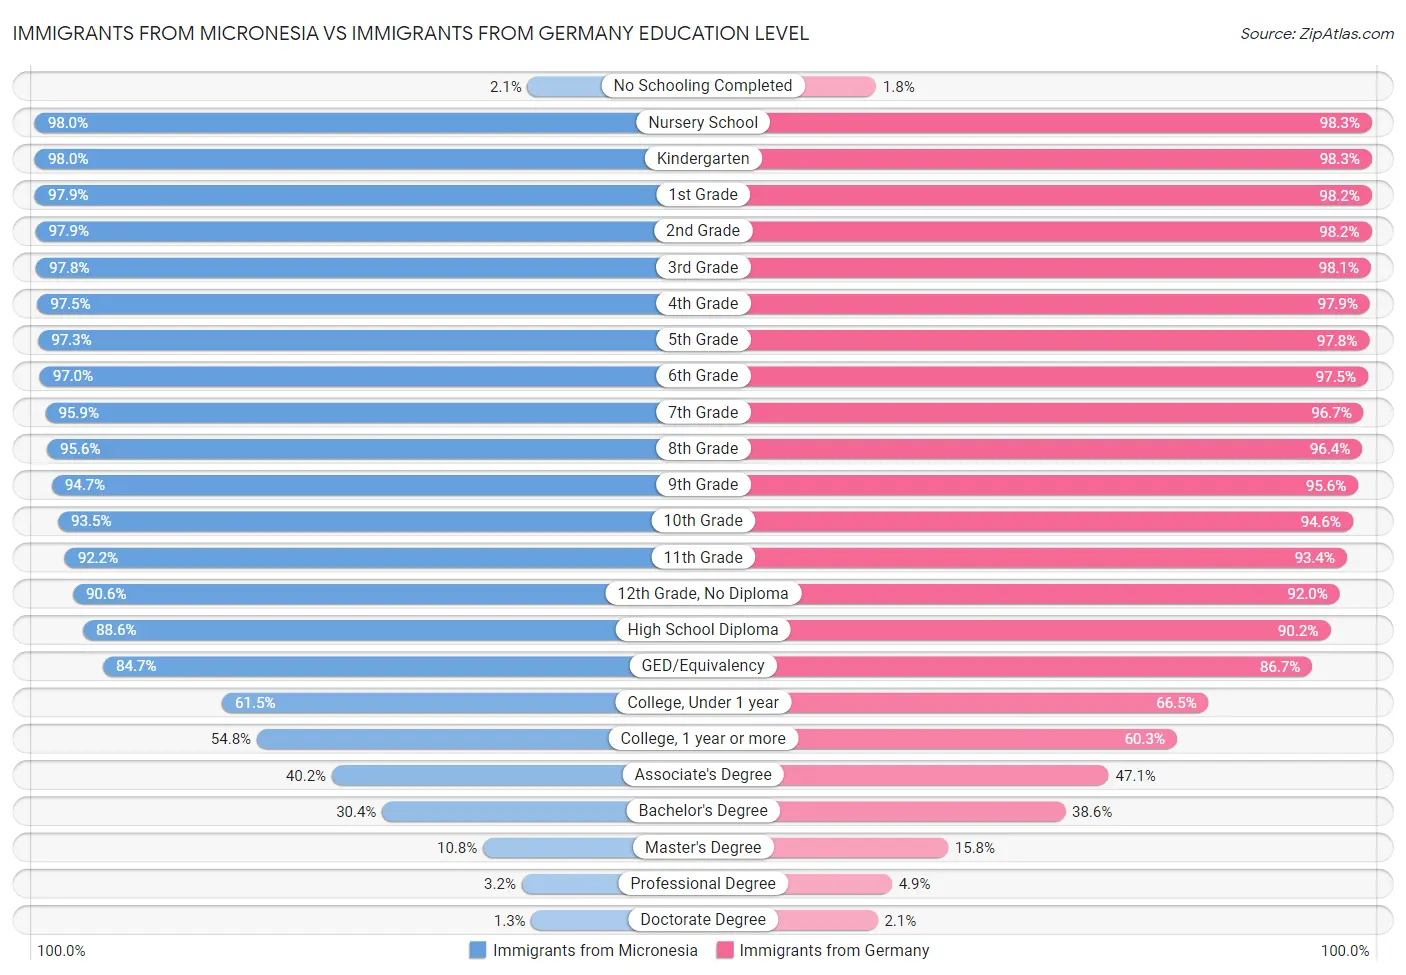 Immigrants from Micronesia vs Immigrants from Germany Education Level